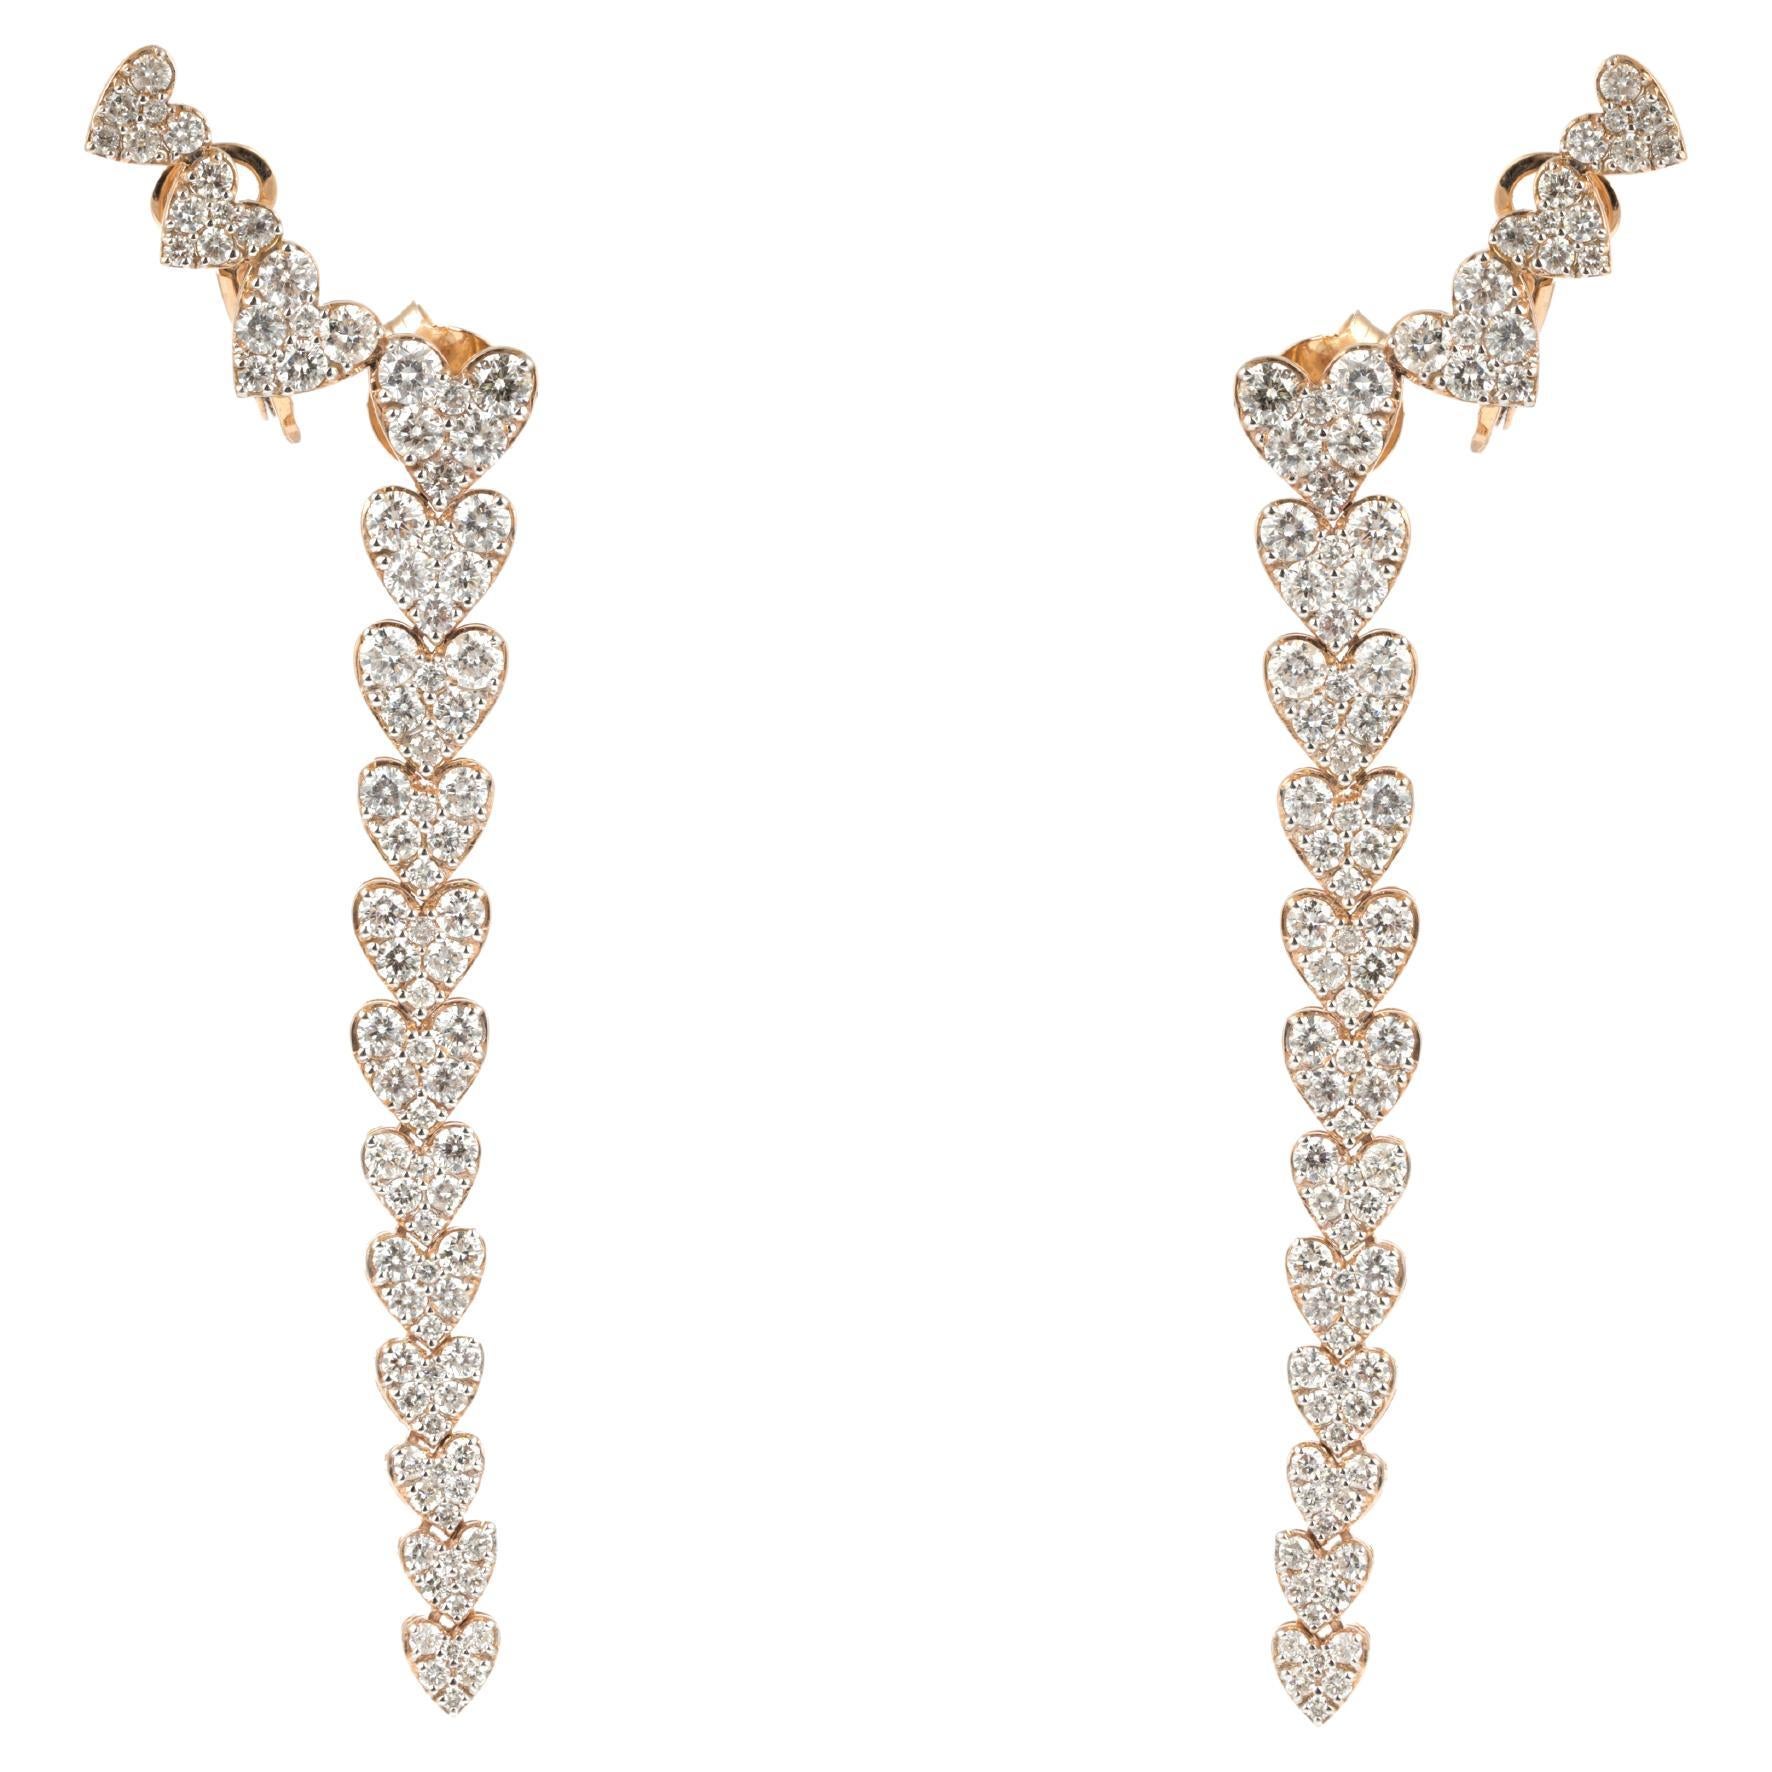 Natural Diamond 5.23cts in 18k Gold 12.91gms Earring